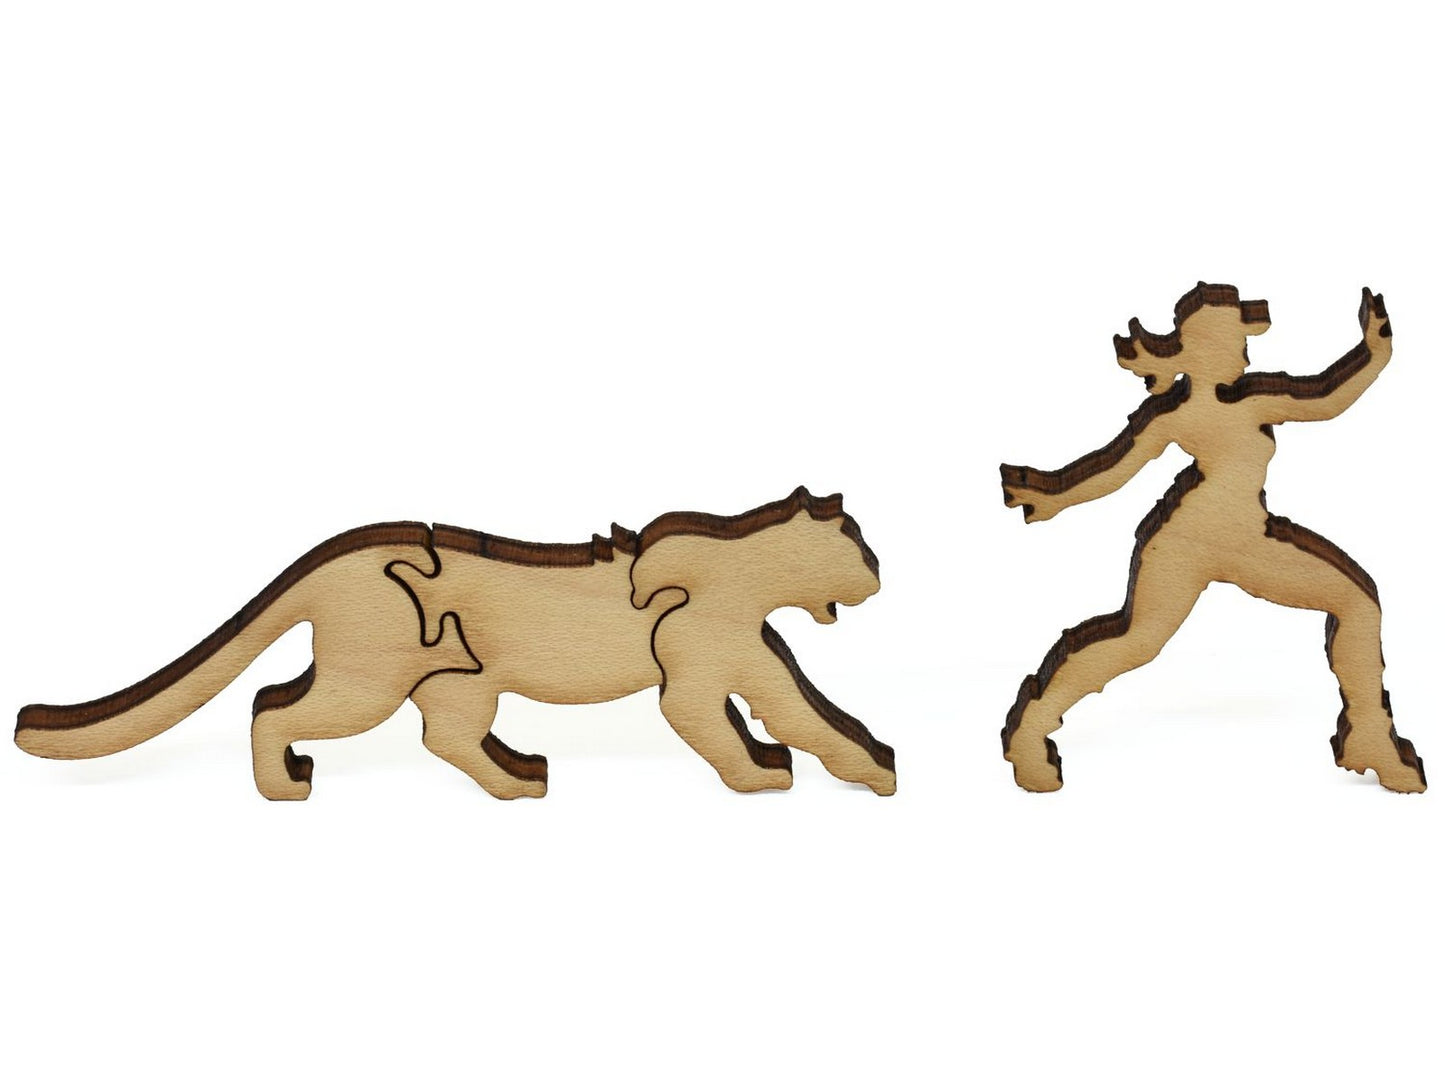 A closeup of pieces showing a hiker and a mountain lion.